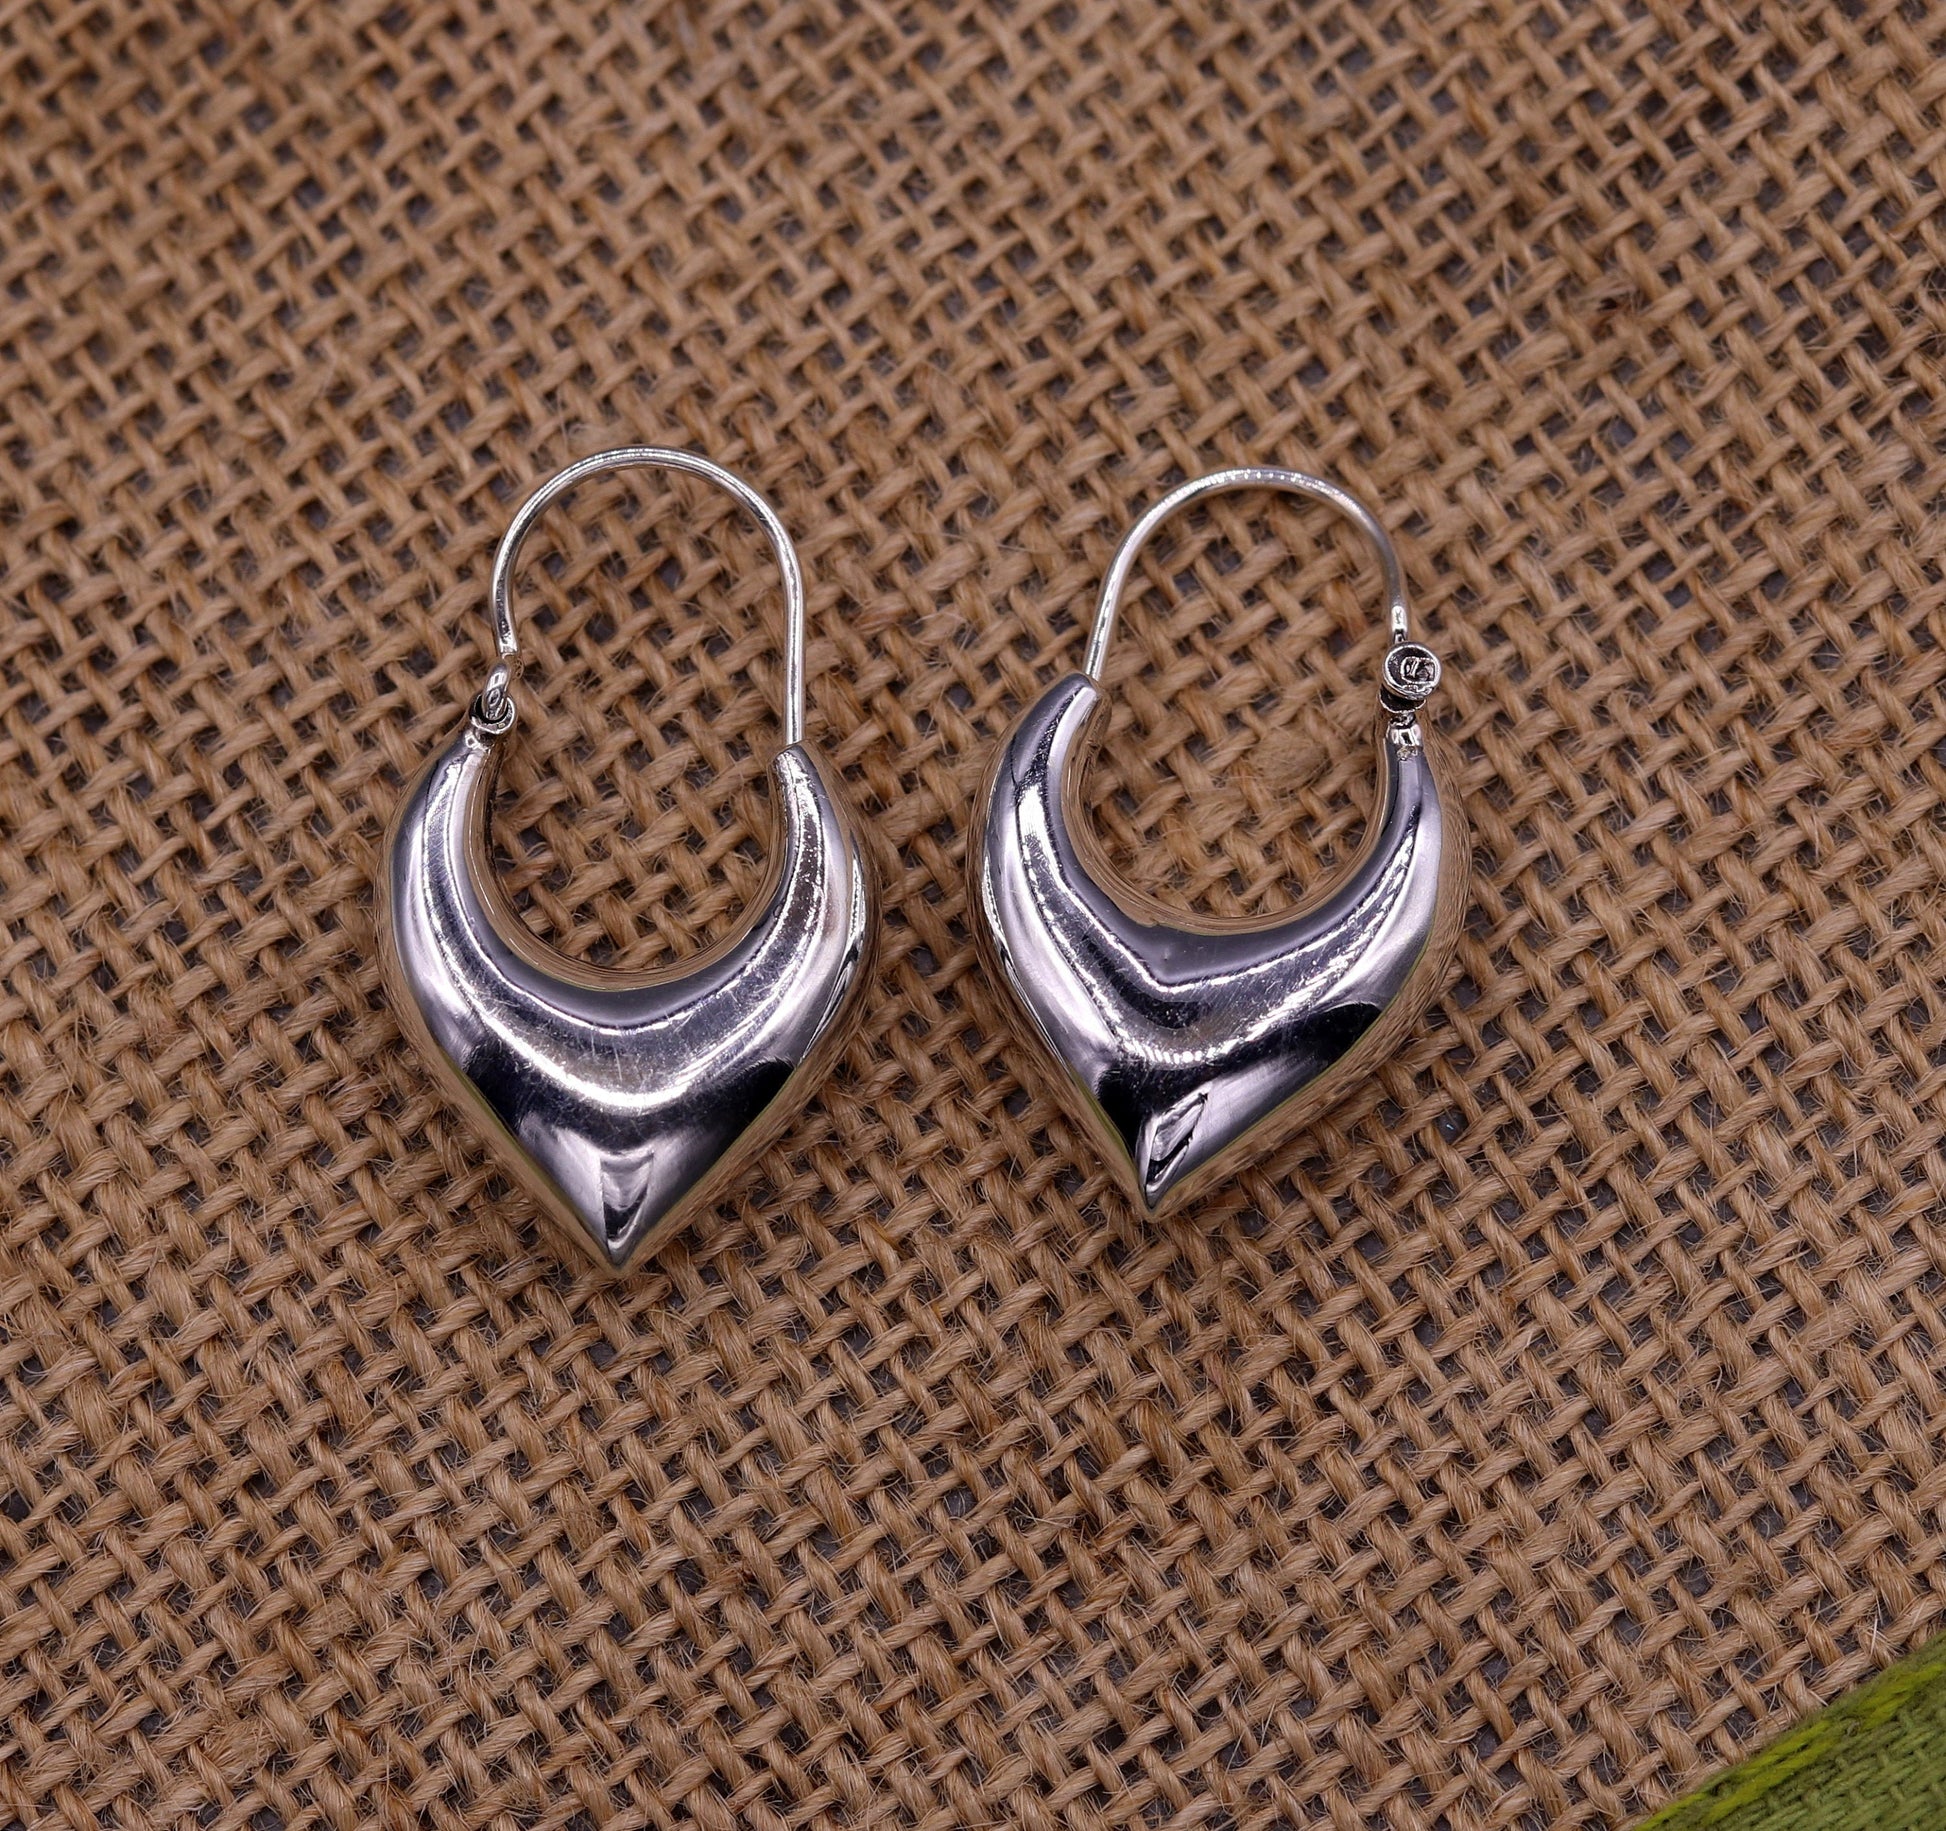 925 sterling pure silver handmade vintage customized design fabulous unisex hoops earrings kundal, ethnic bali tribal jewelry india s585 - TRIBAL ORNAMENTS